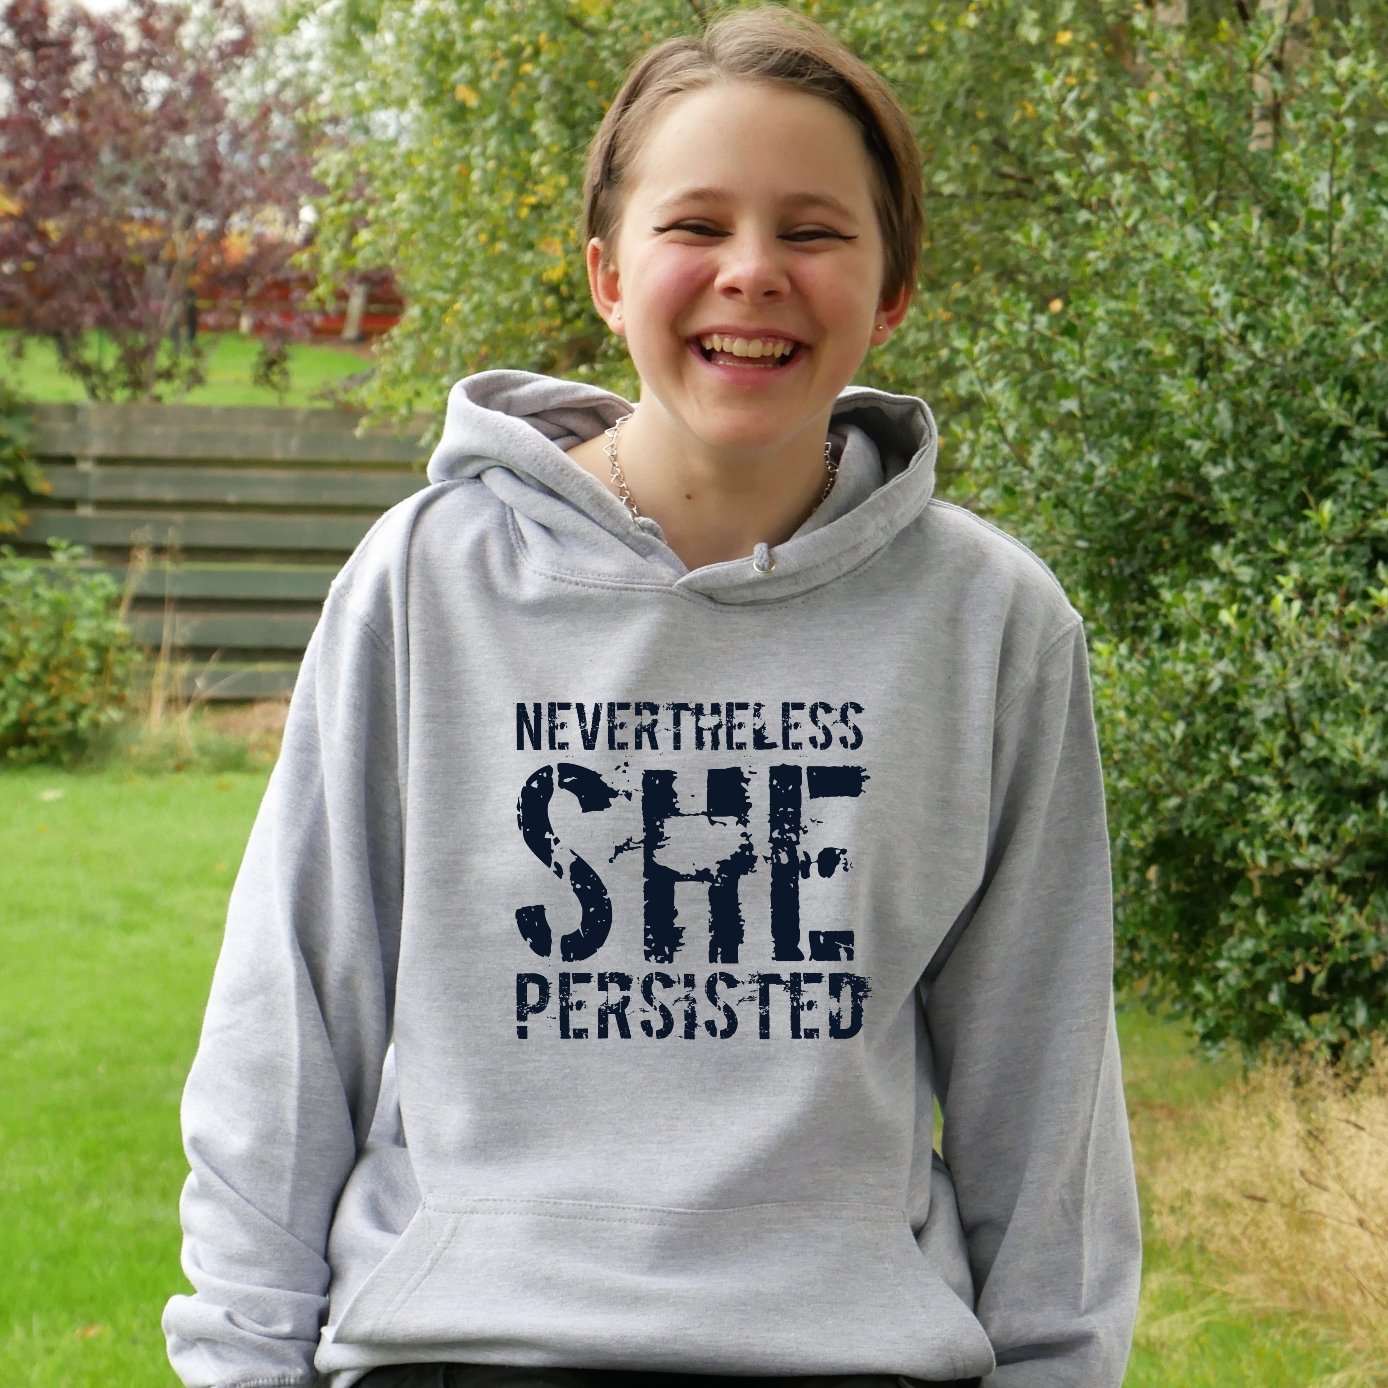 Nevertheless She Persisted - Hoodie for Teens/Adults - Scarf Monkey